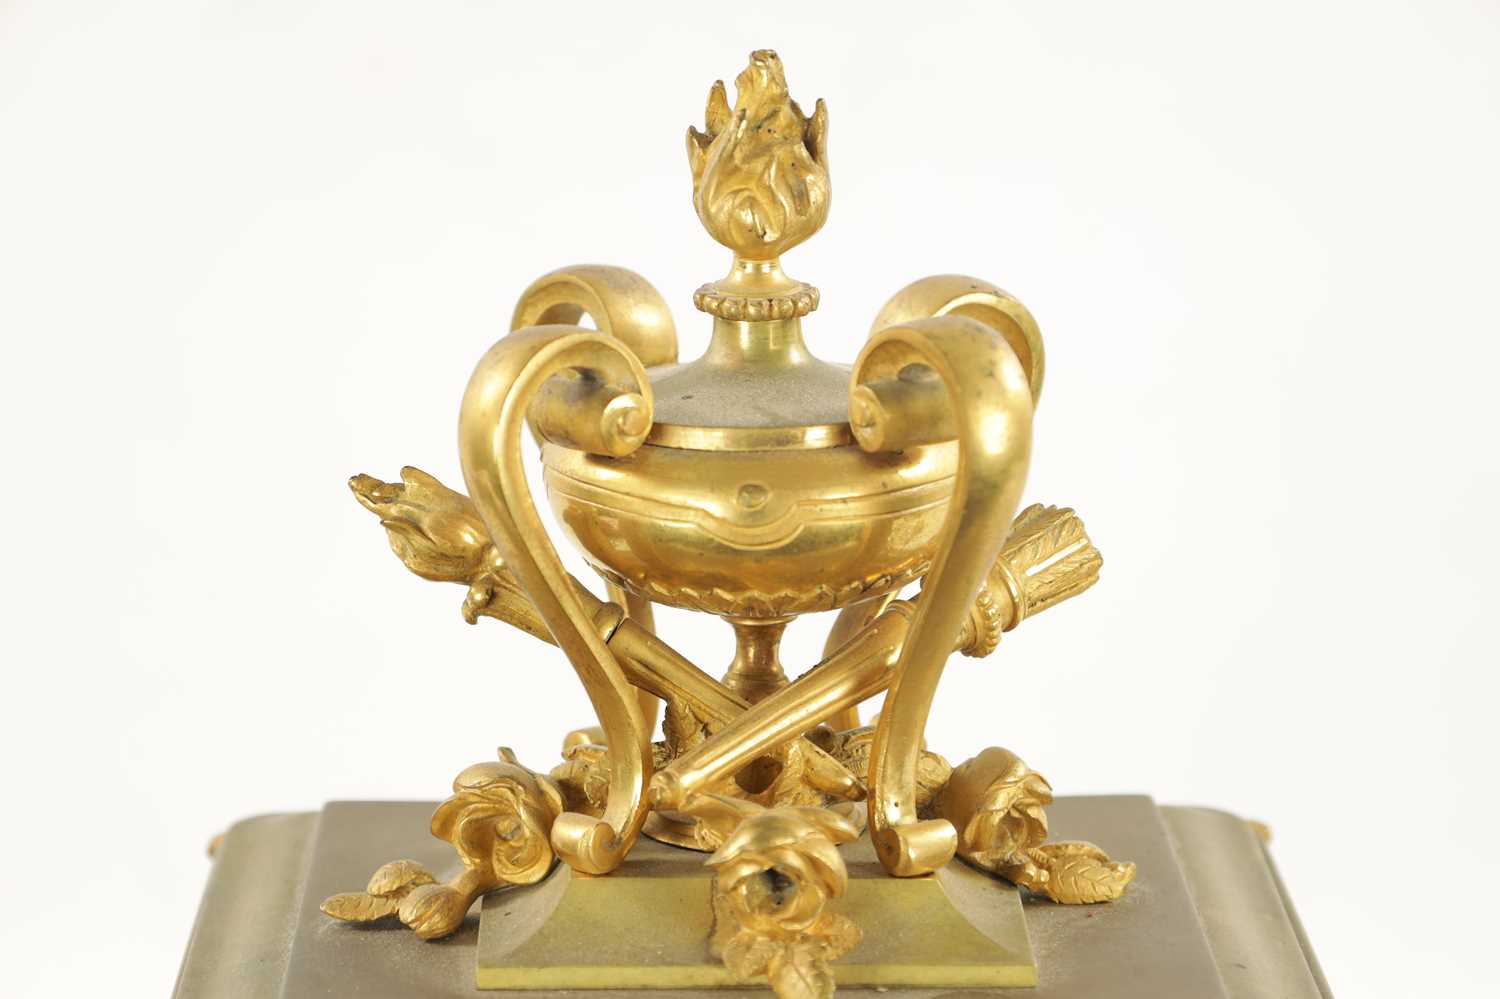 A LATE 19TH CENTURY FRENCH GILT BRASS FOUR-GLASS MANTEL CLOCK - Image 3 of 10